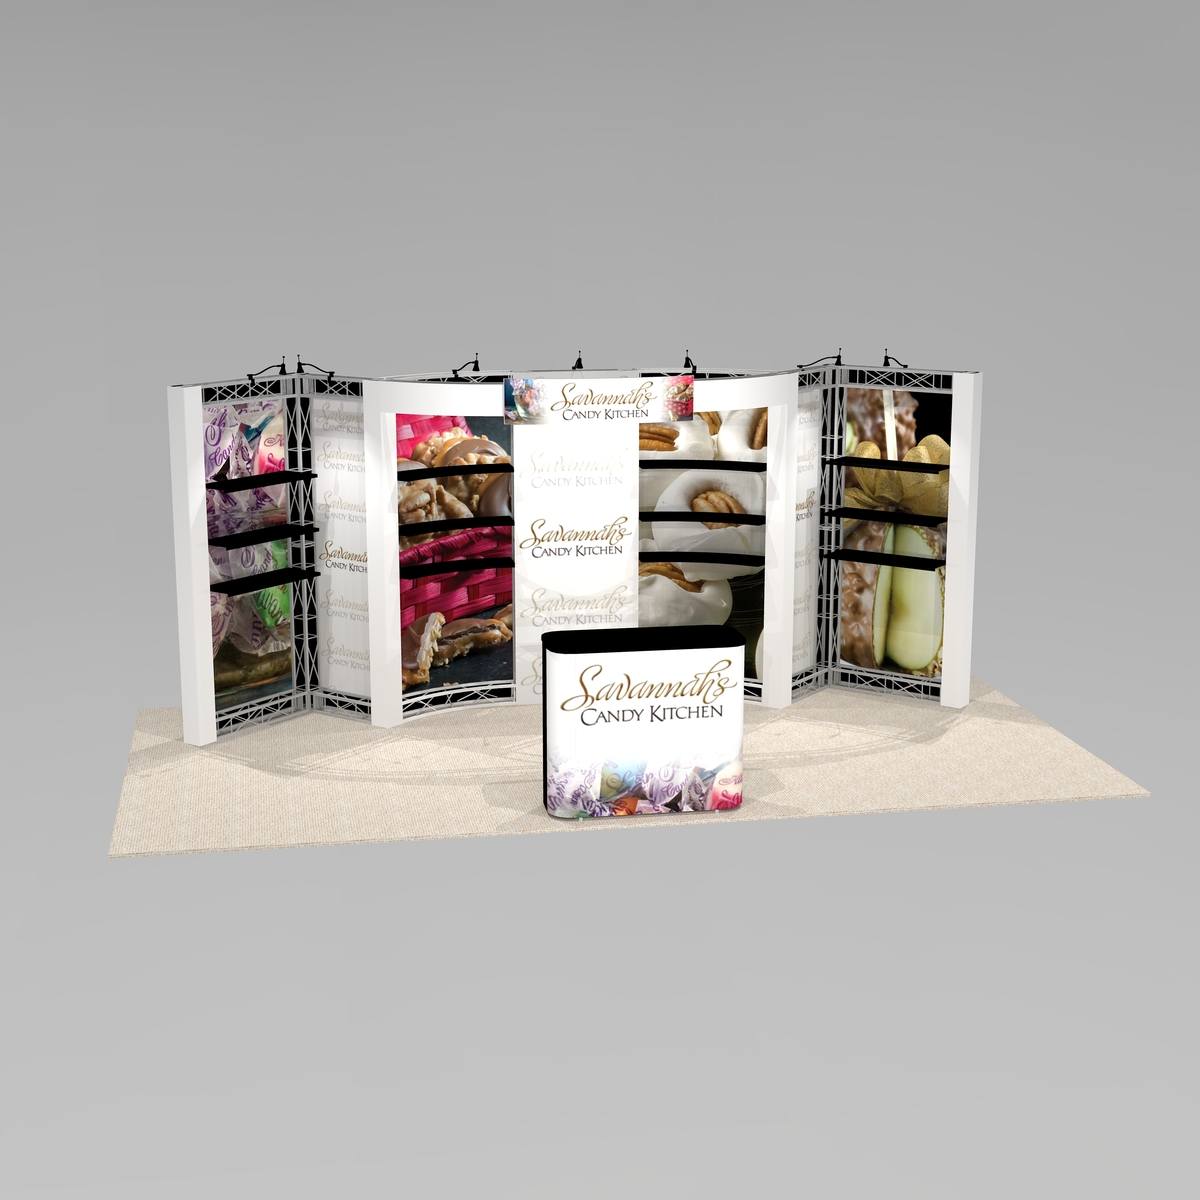 Trade show exhibit design BAY1020 has extensive shelving and great lighting - Graphic Package C